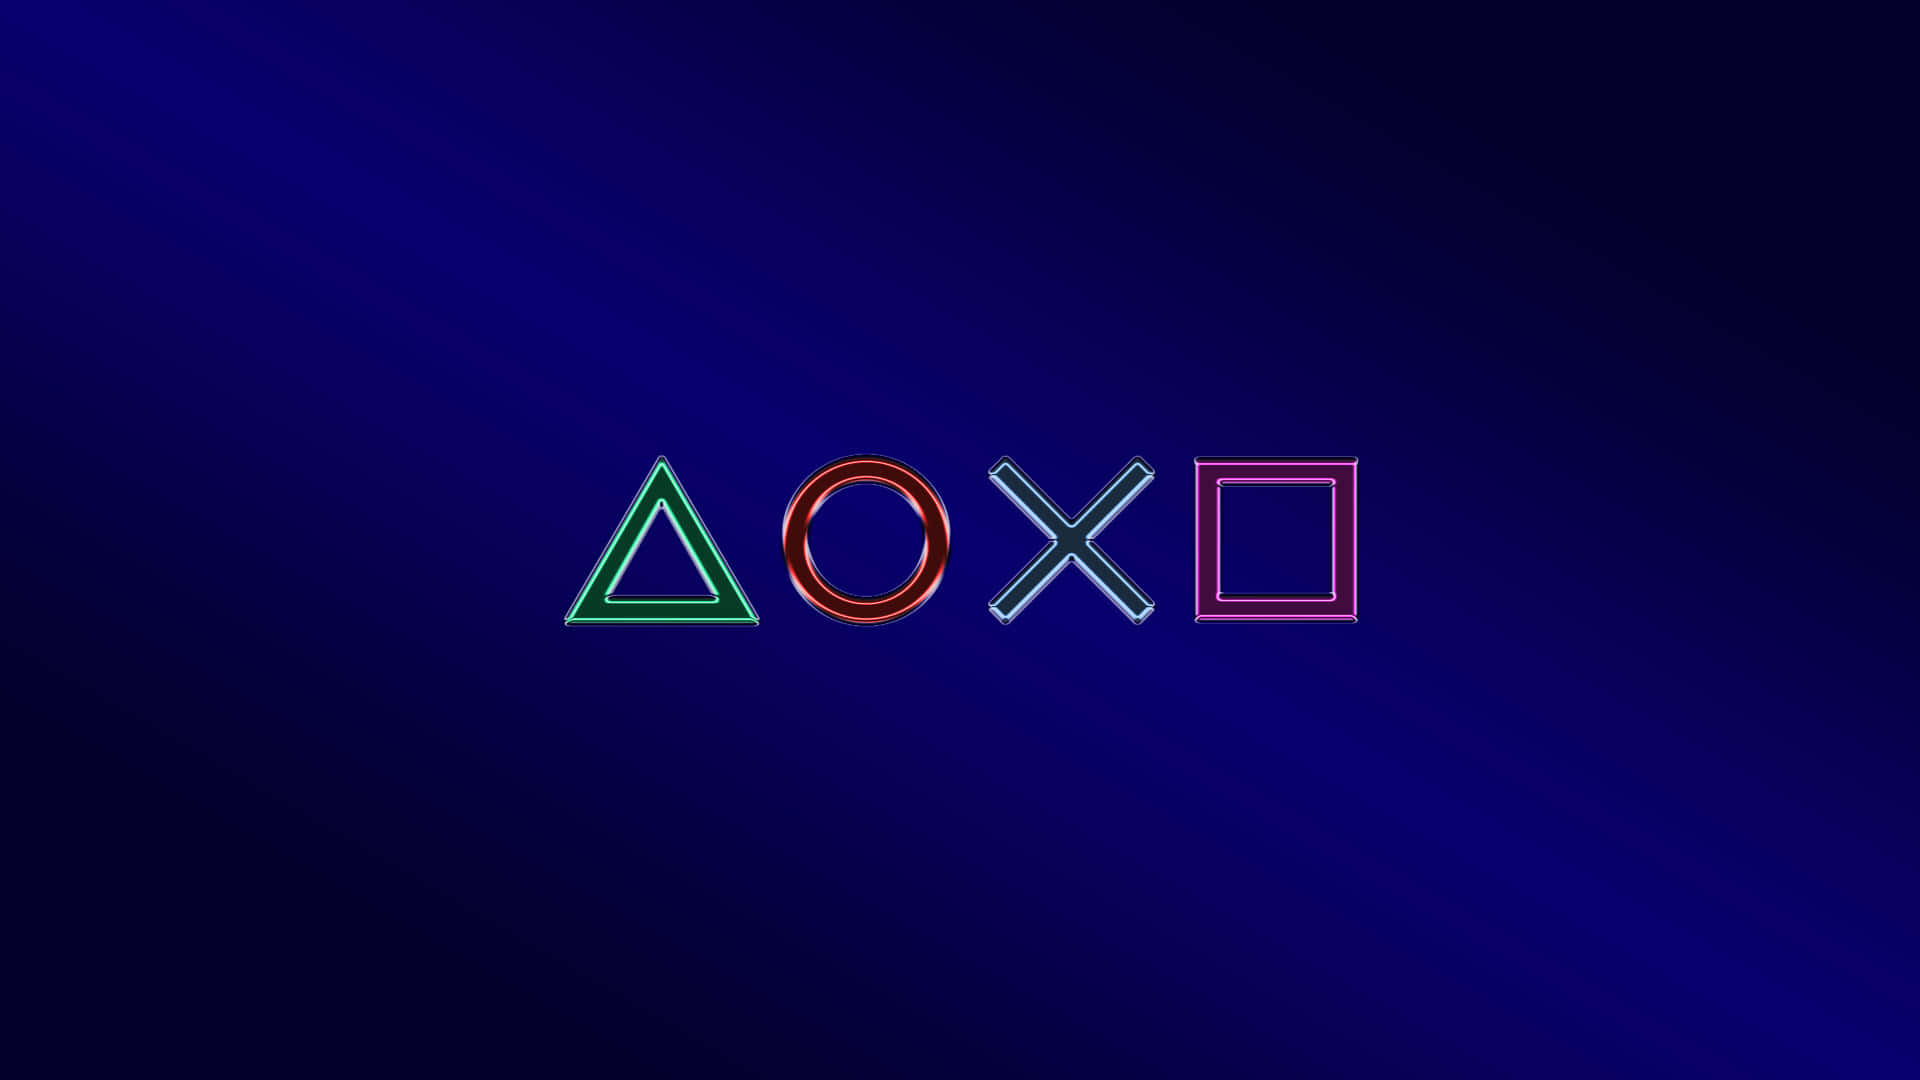 Play your favorite games on Playstation